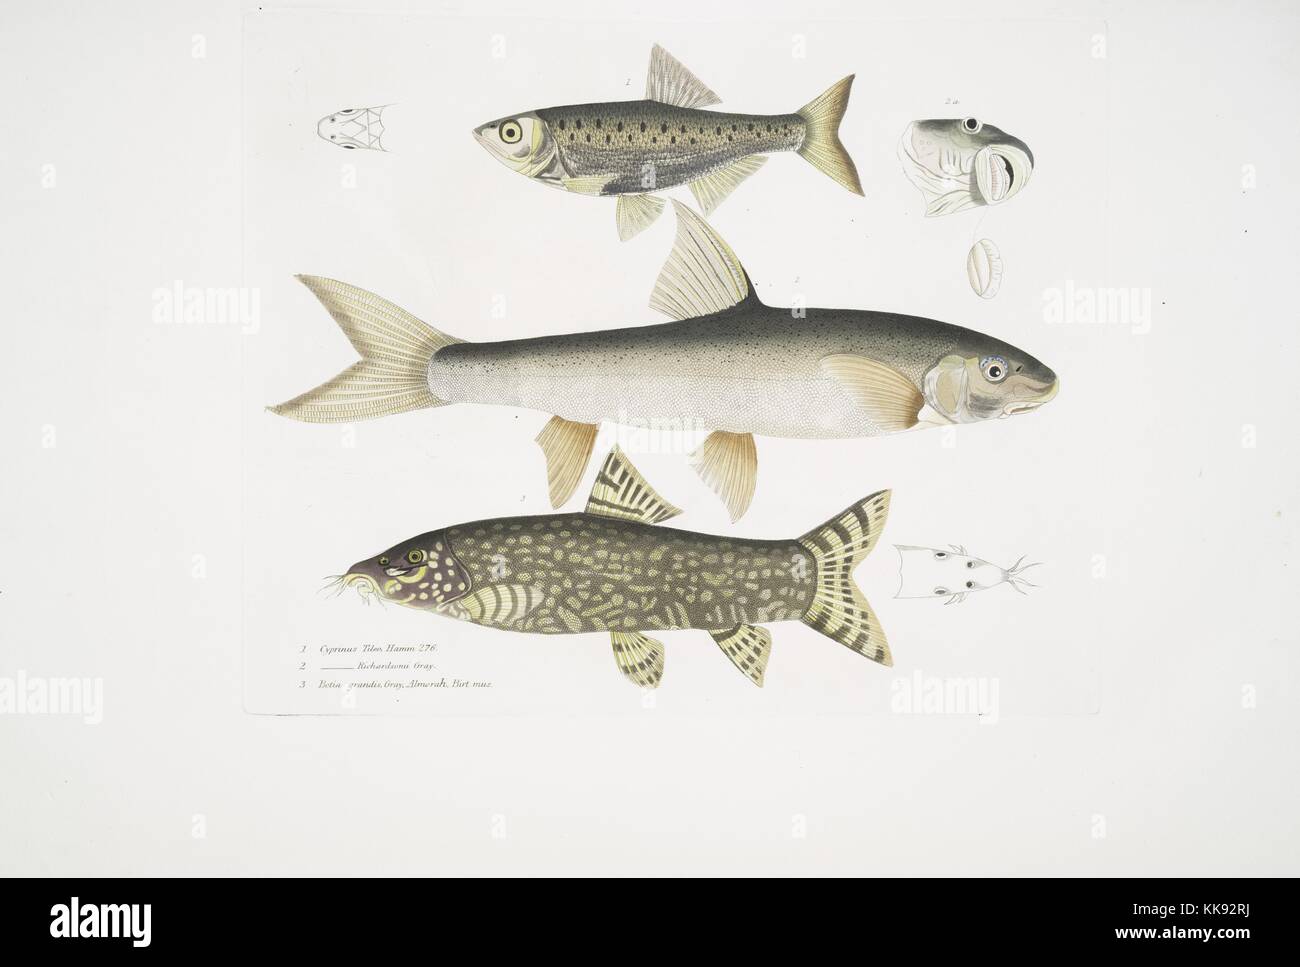 Hand colored print depicting three fish, at the top a Tileo Carp (Cyprinus tileo), in the middle a Richardson's Carp (Cyprinus richardsonii), and at the bottom a Beautiful Loach (Botia grandis), from the book 'Illustrations of Indian Zoology, Chiefly from the Collection of Major General Hardwicke', 1832. From the New York Public Library. Stock Photo